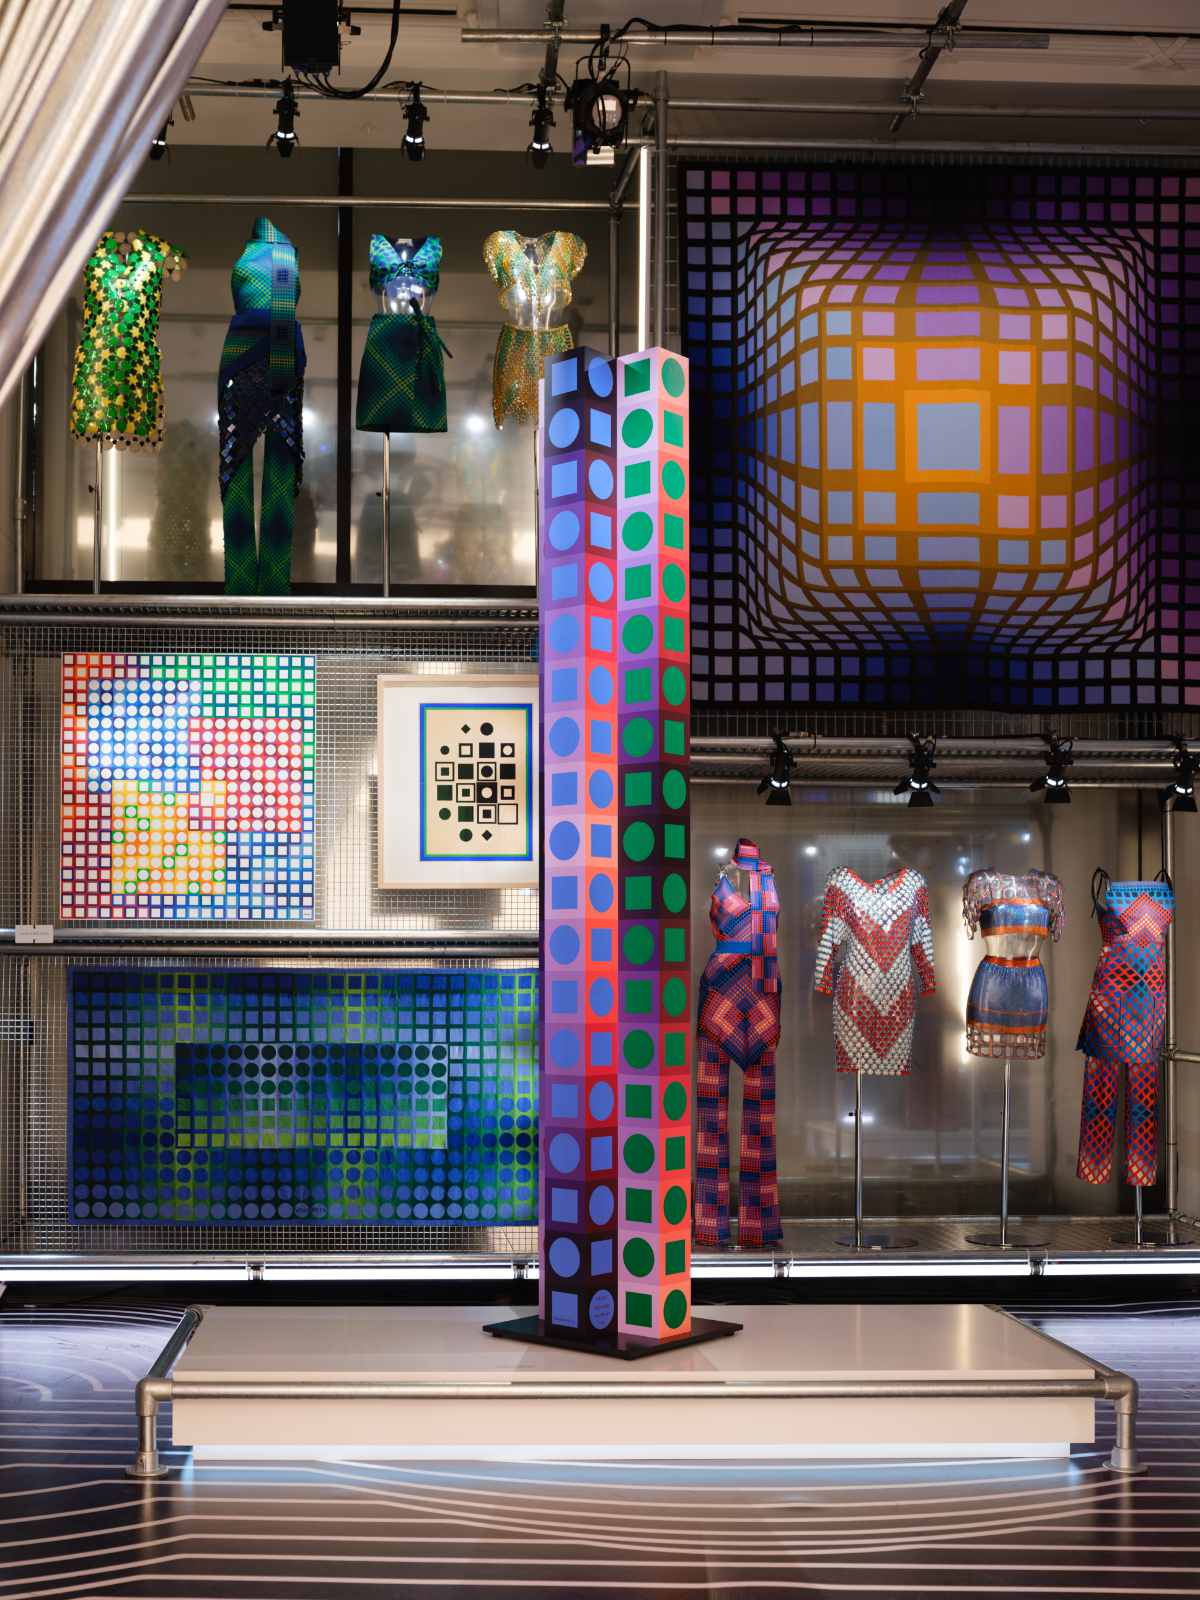 Selfridges Explores The Vasarely Universe In Partnership With The Fondation Vasarely And Paco Rabann